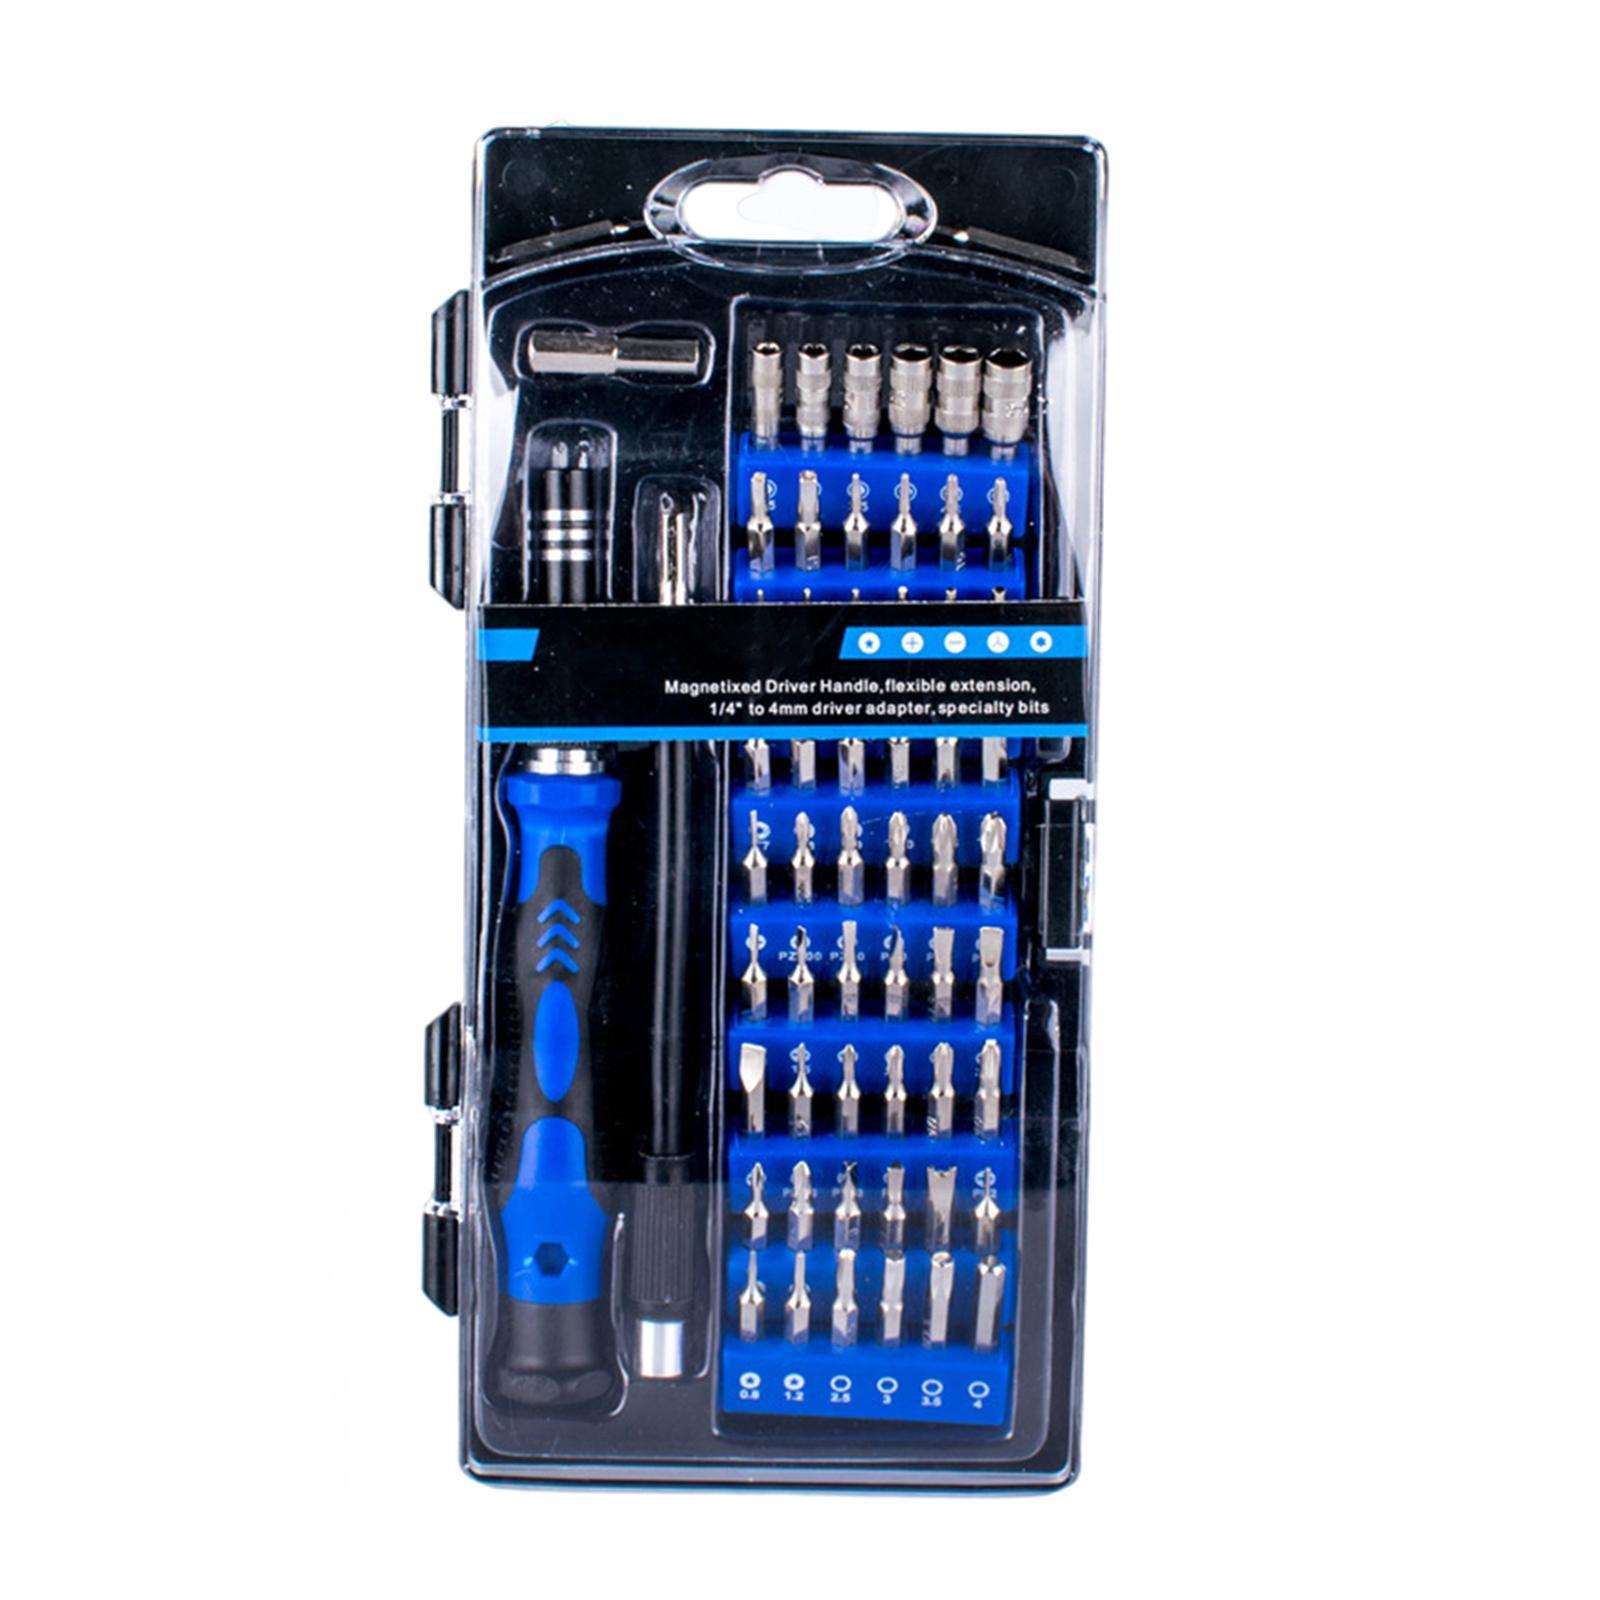 58 Pieces in 1 Precision Screwdriver Set DIY Multi-Functional for Phone